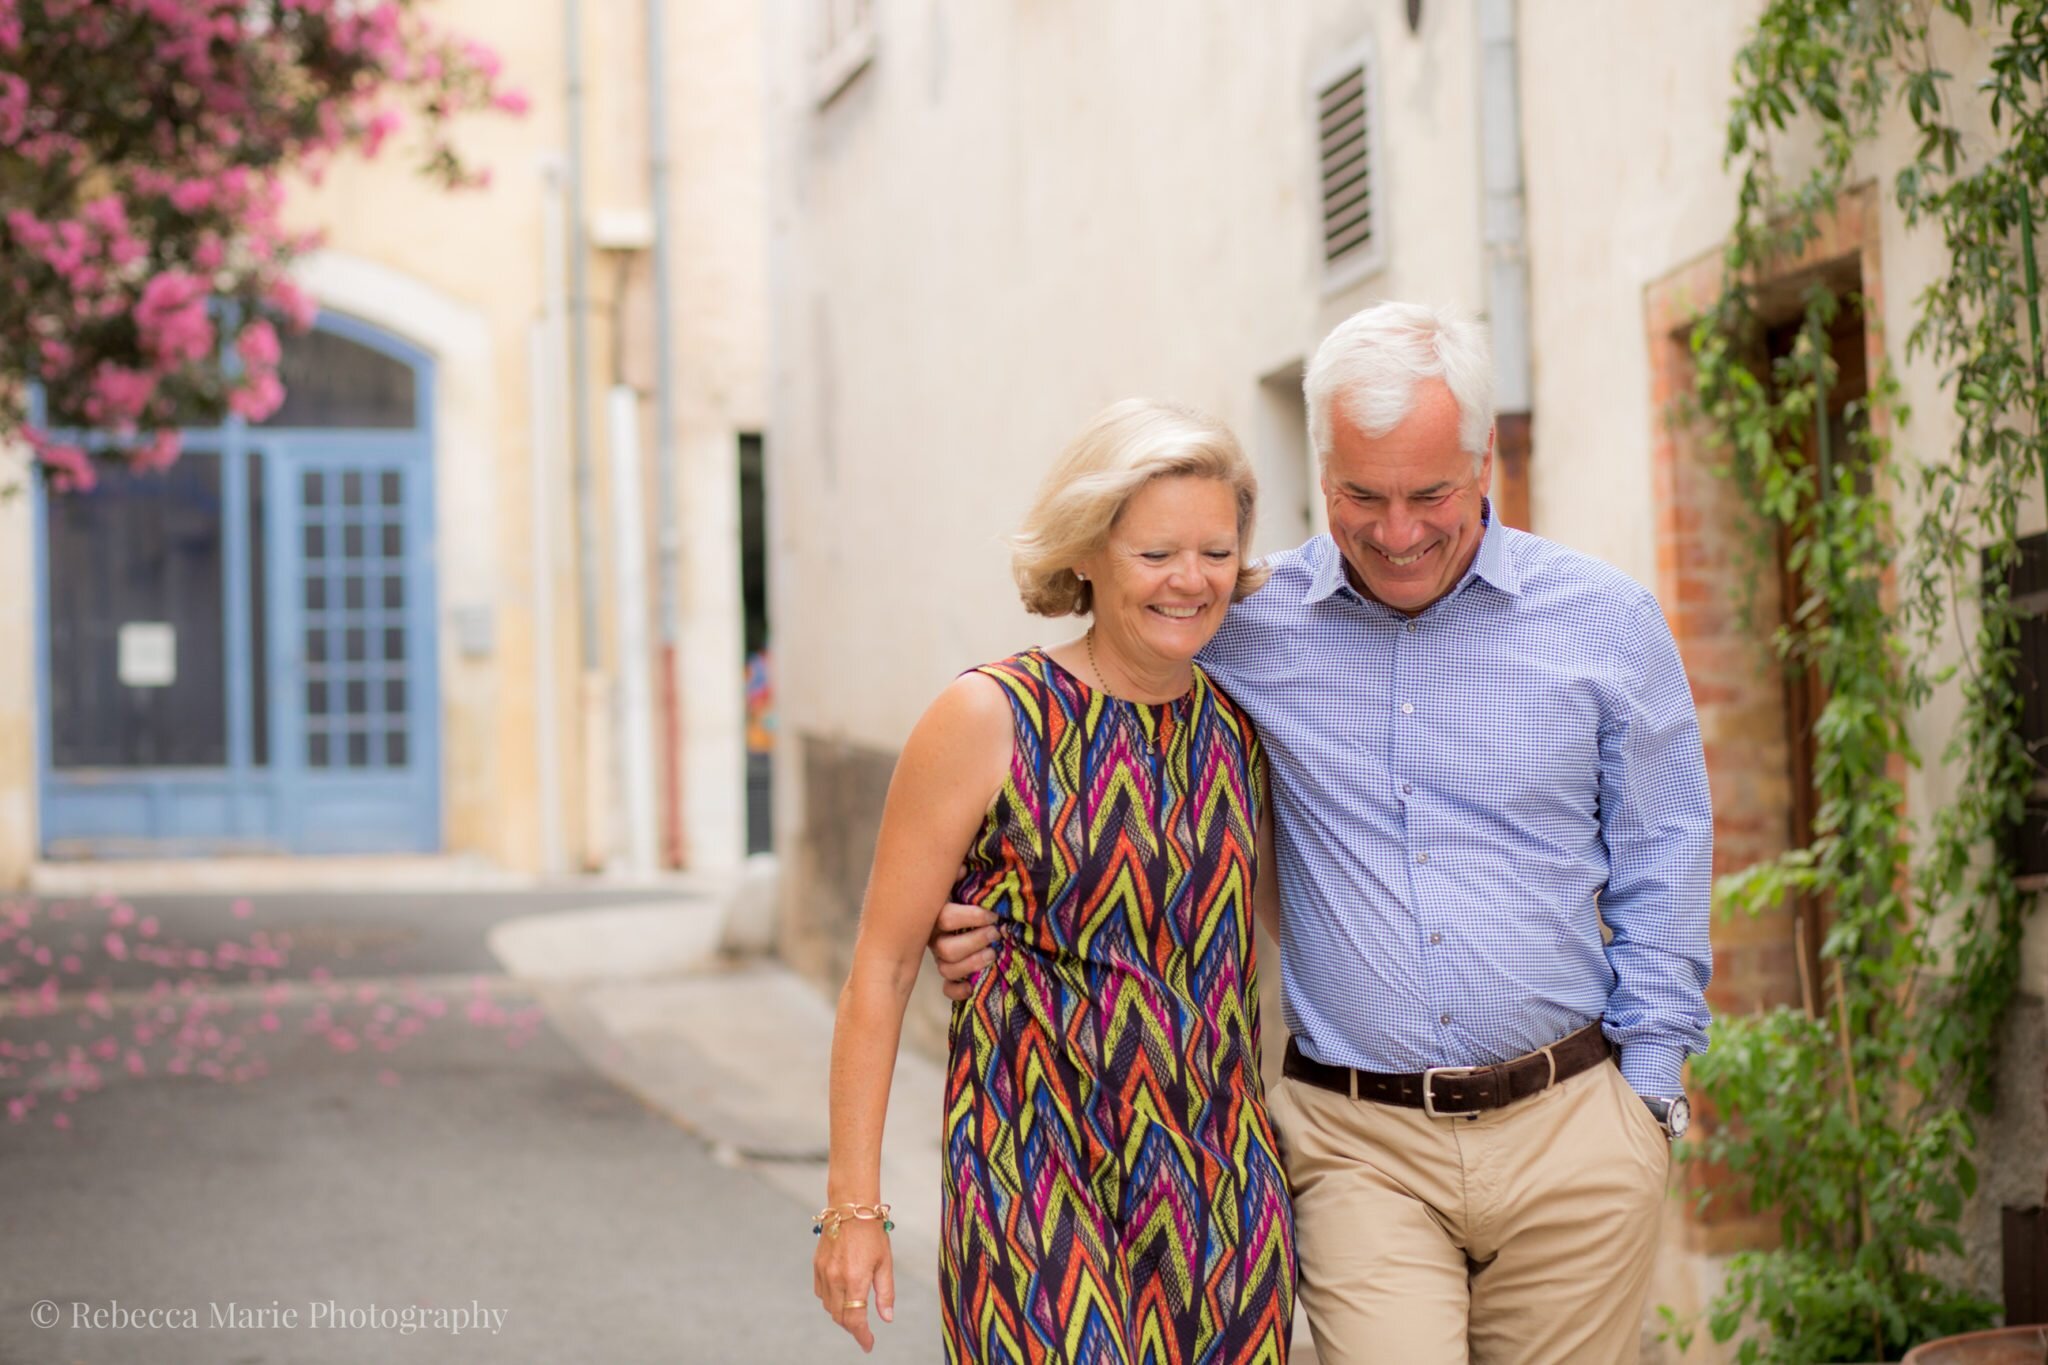 Portraits-in-France-Valbonne-Rebecca-Marie-Photography-1-1